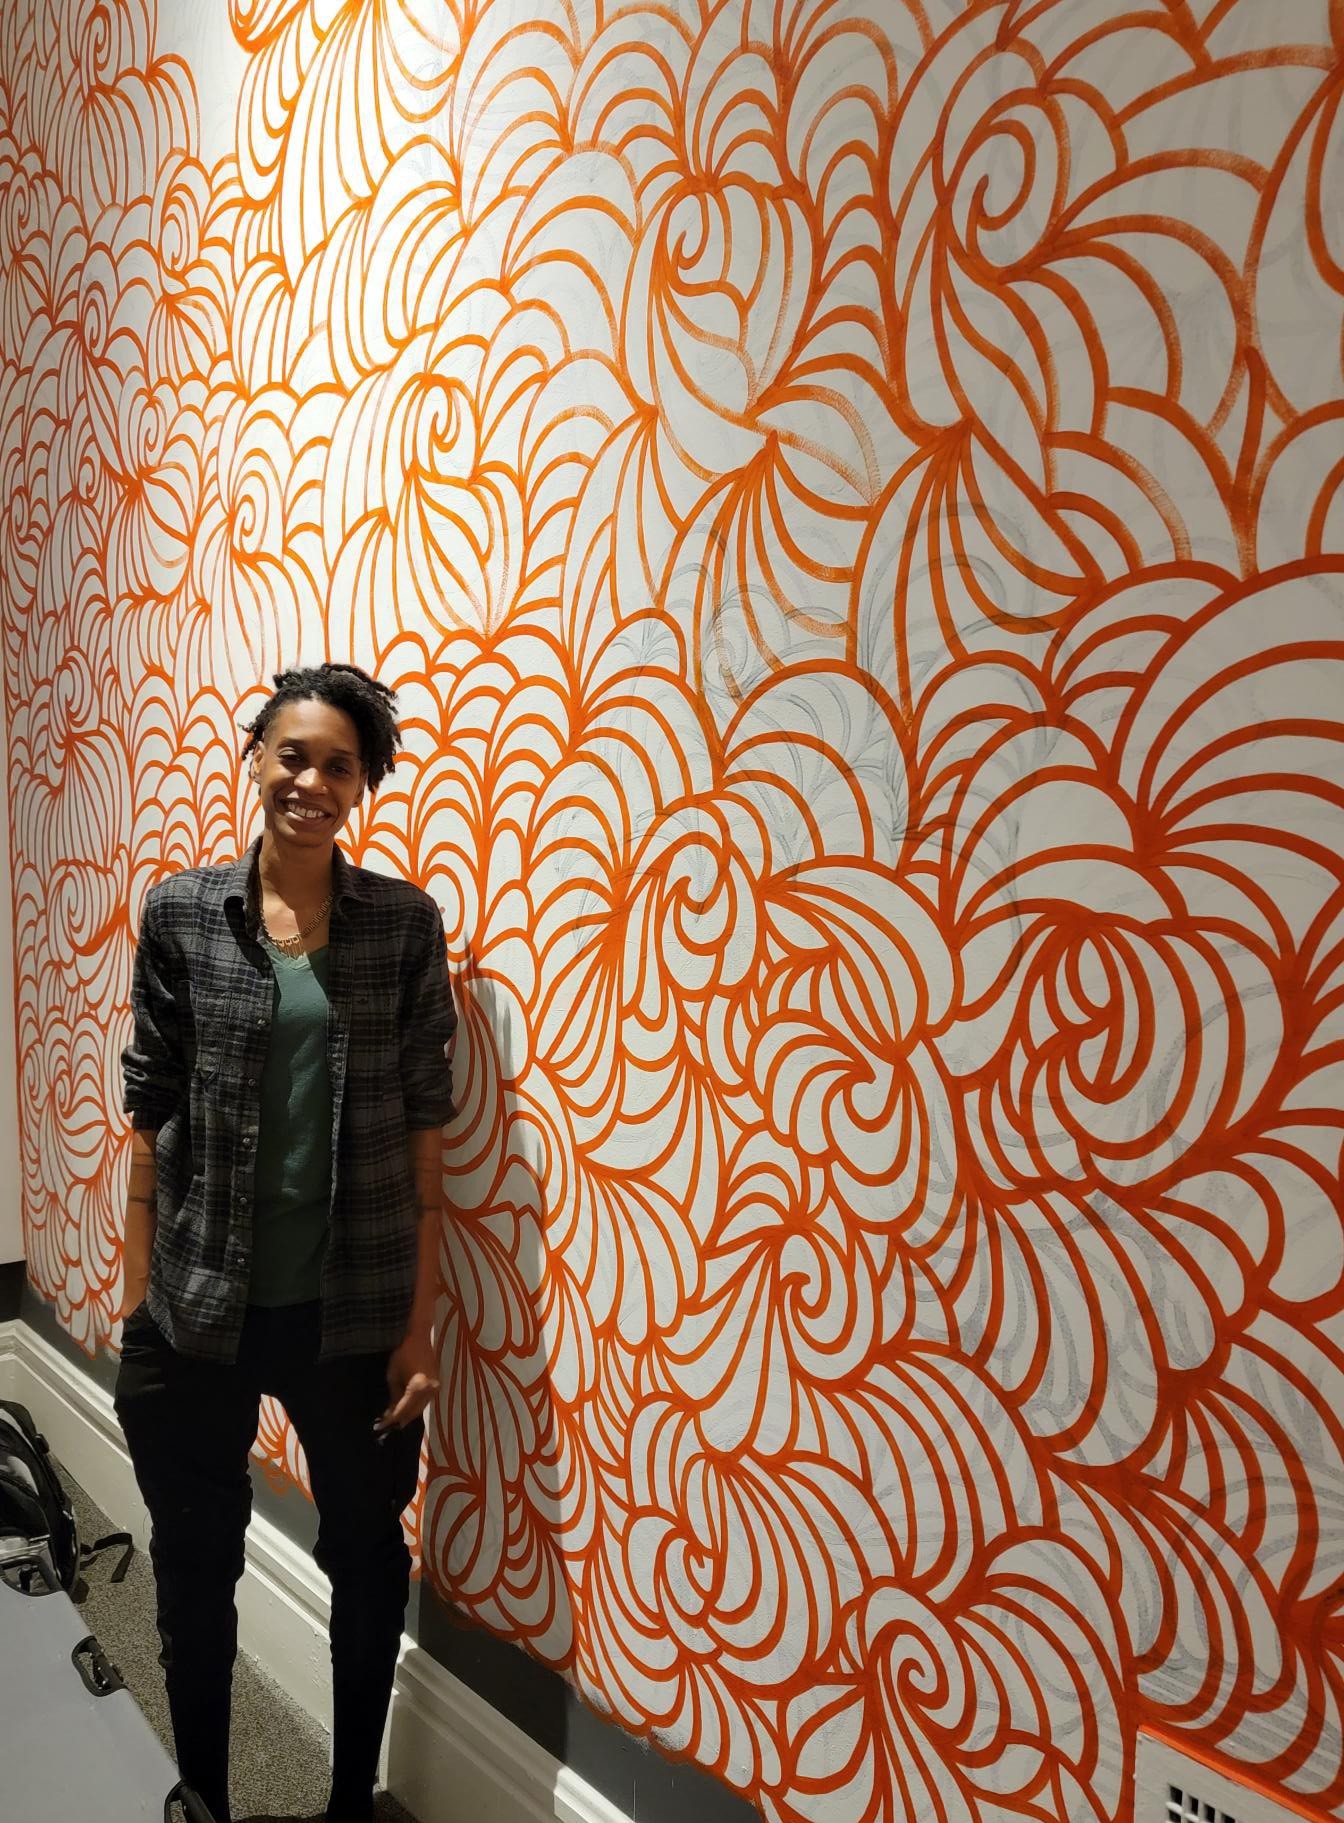 Carnegie's Artist-in-Residence Alexis "STIX" Brown stands against the "Anxiety" Wall.